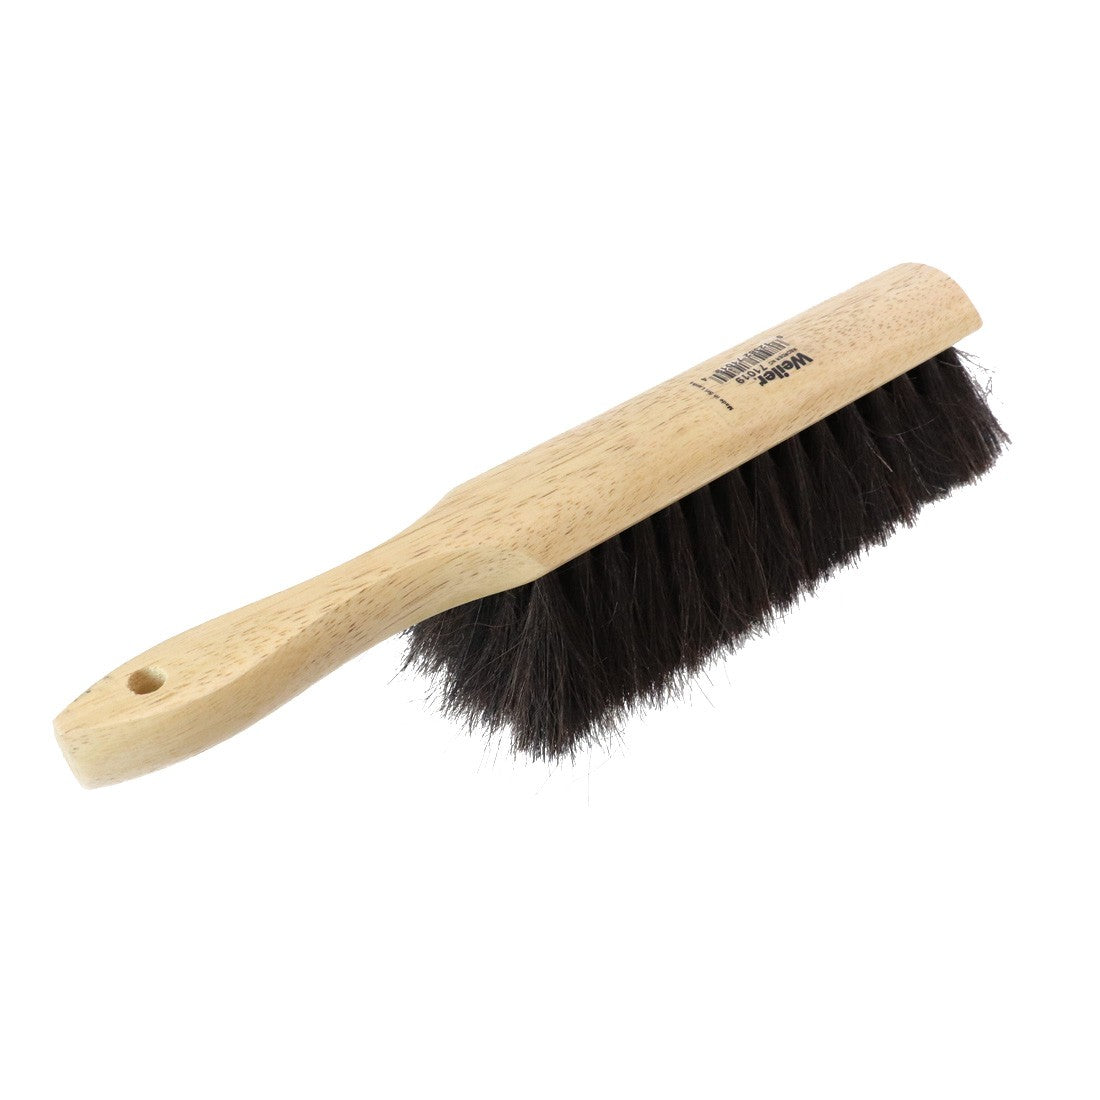 HORSEHAIR BRUSH DELUXE - Cleaner's Depot - Upholstery Cleaning